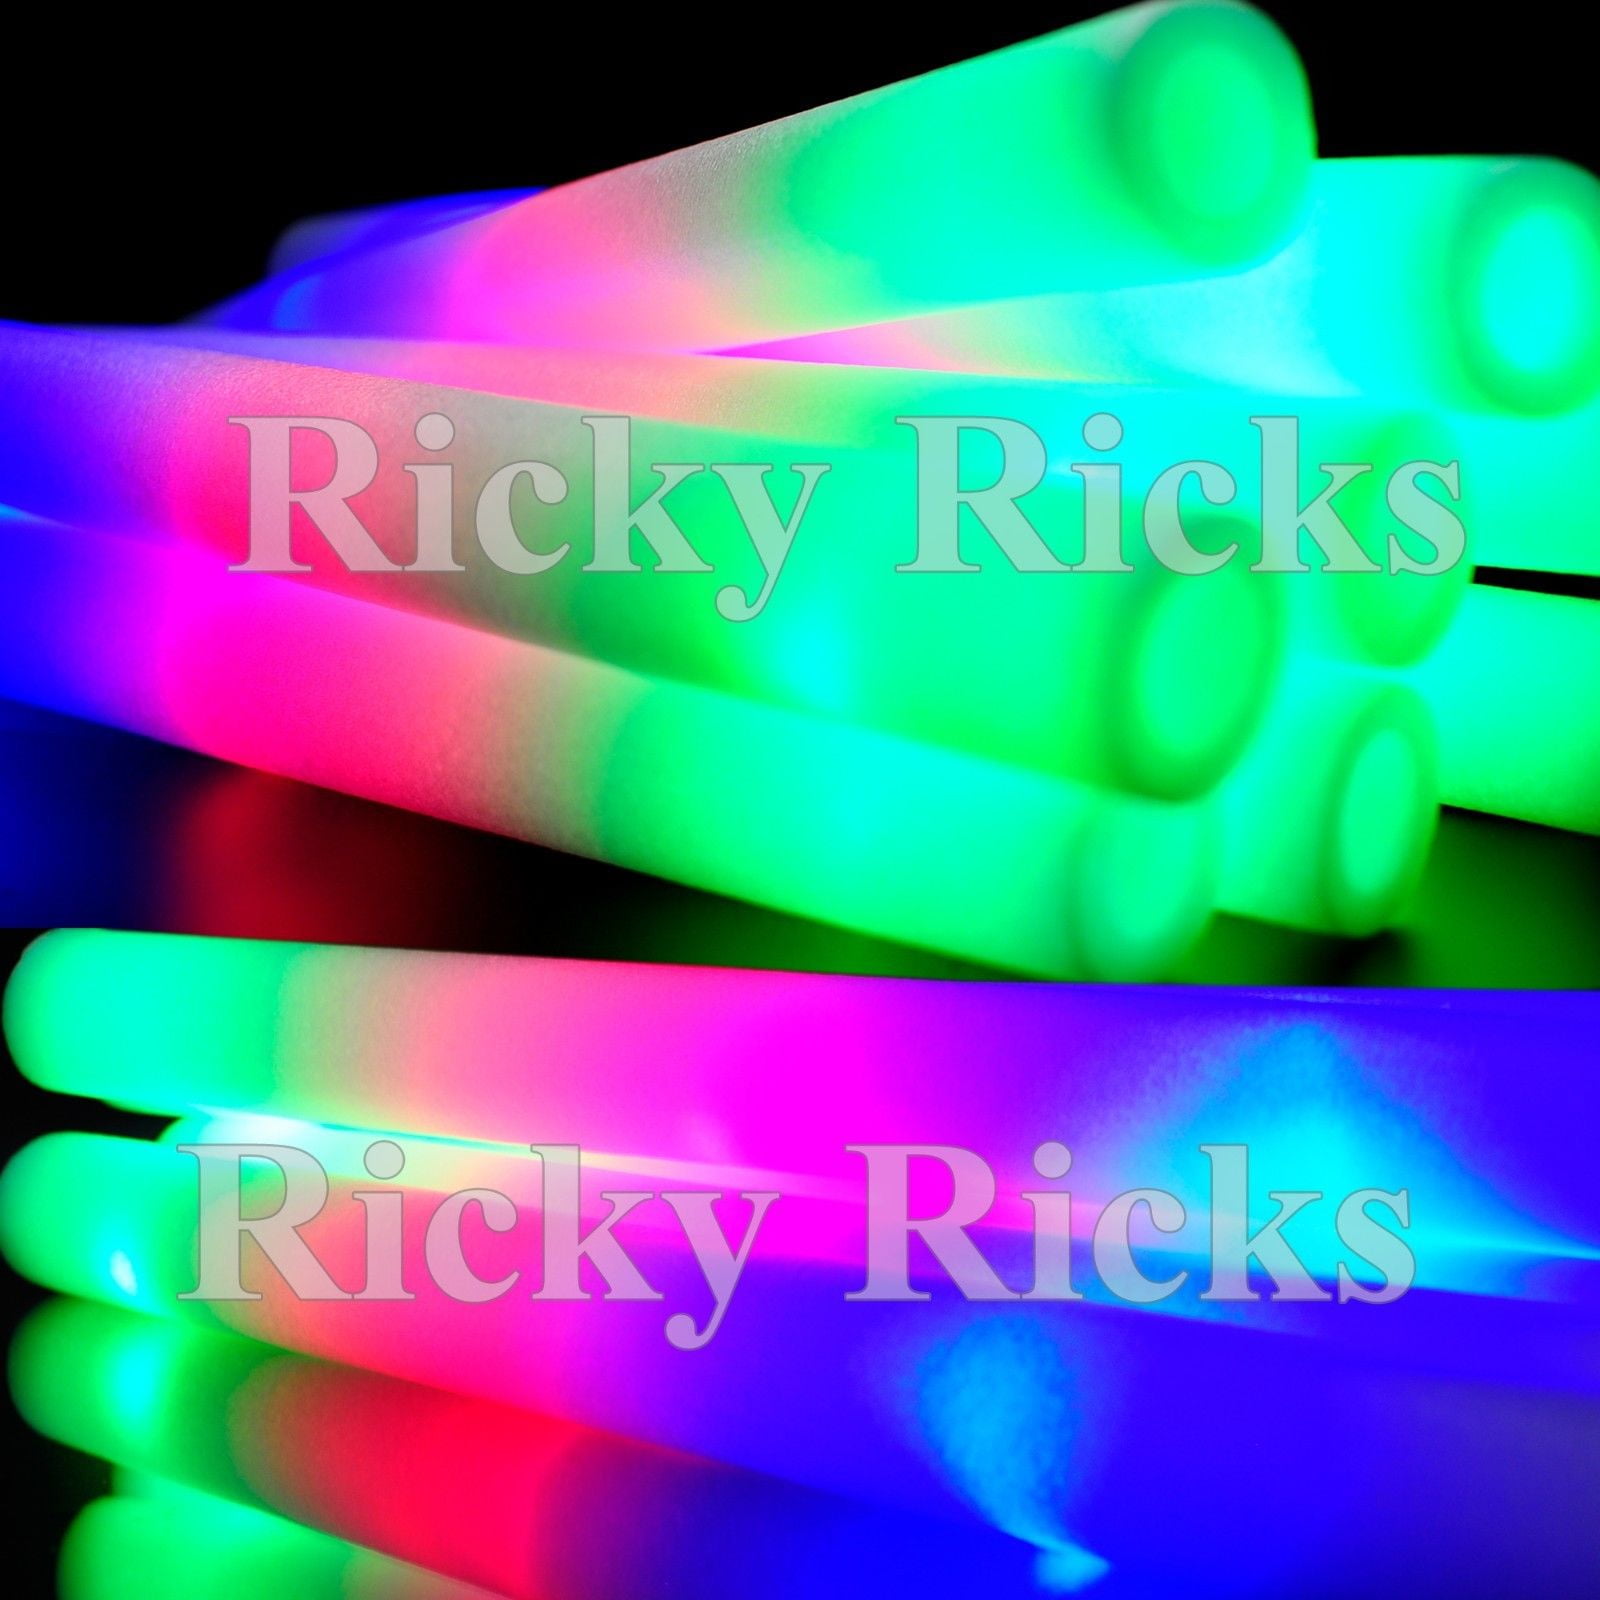 It's My Year Glow Stick Tube Pack (100-Piece), Multicolor (ULT-GLO)